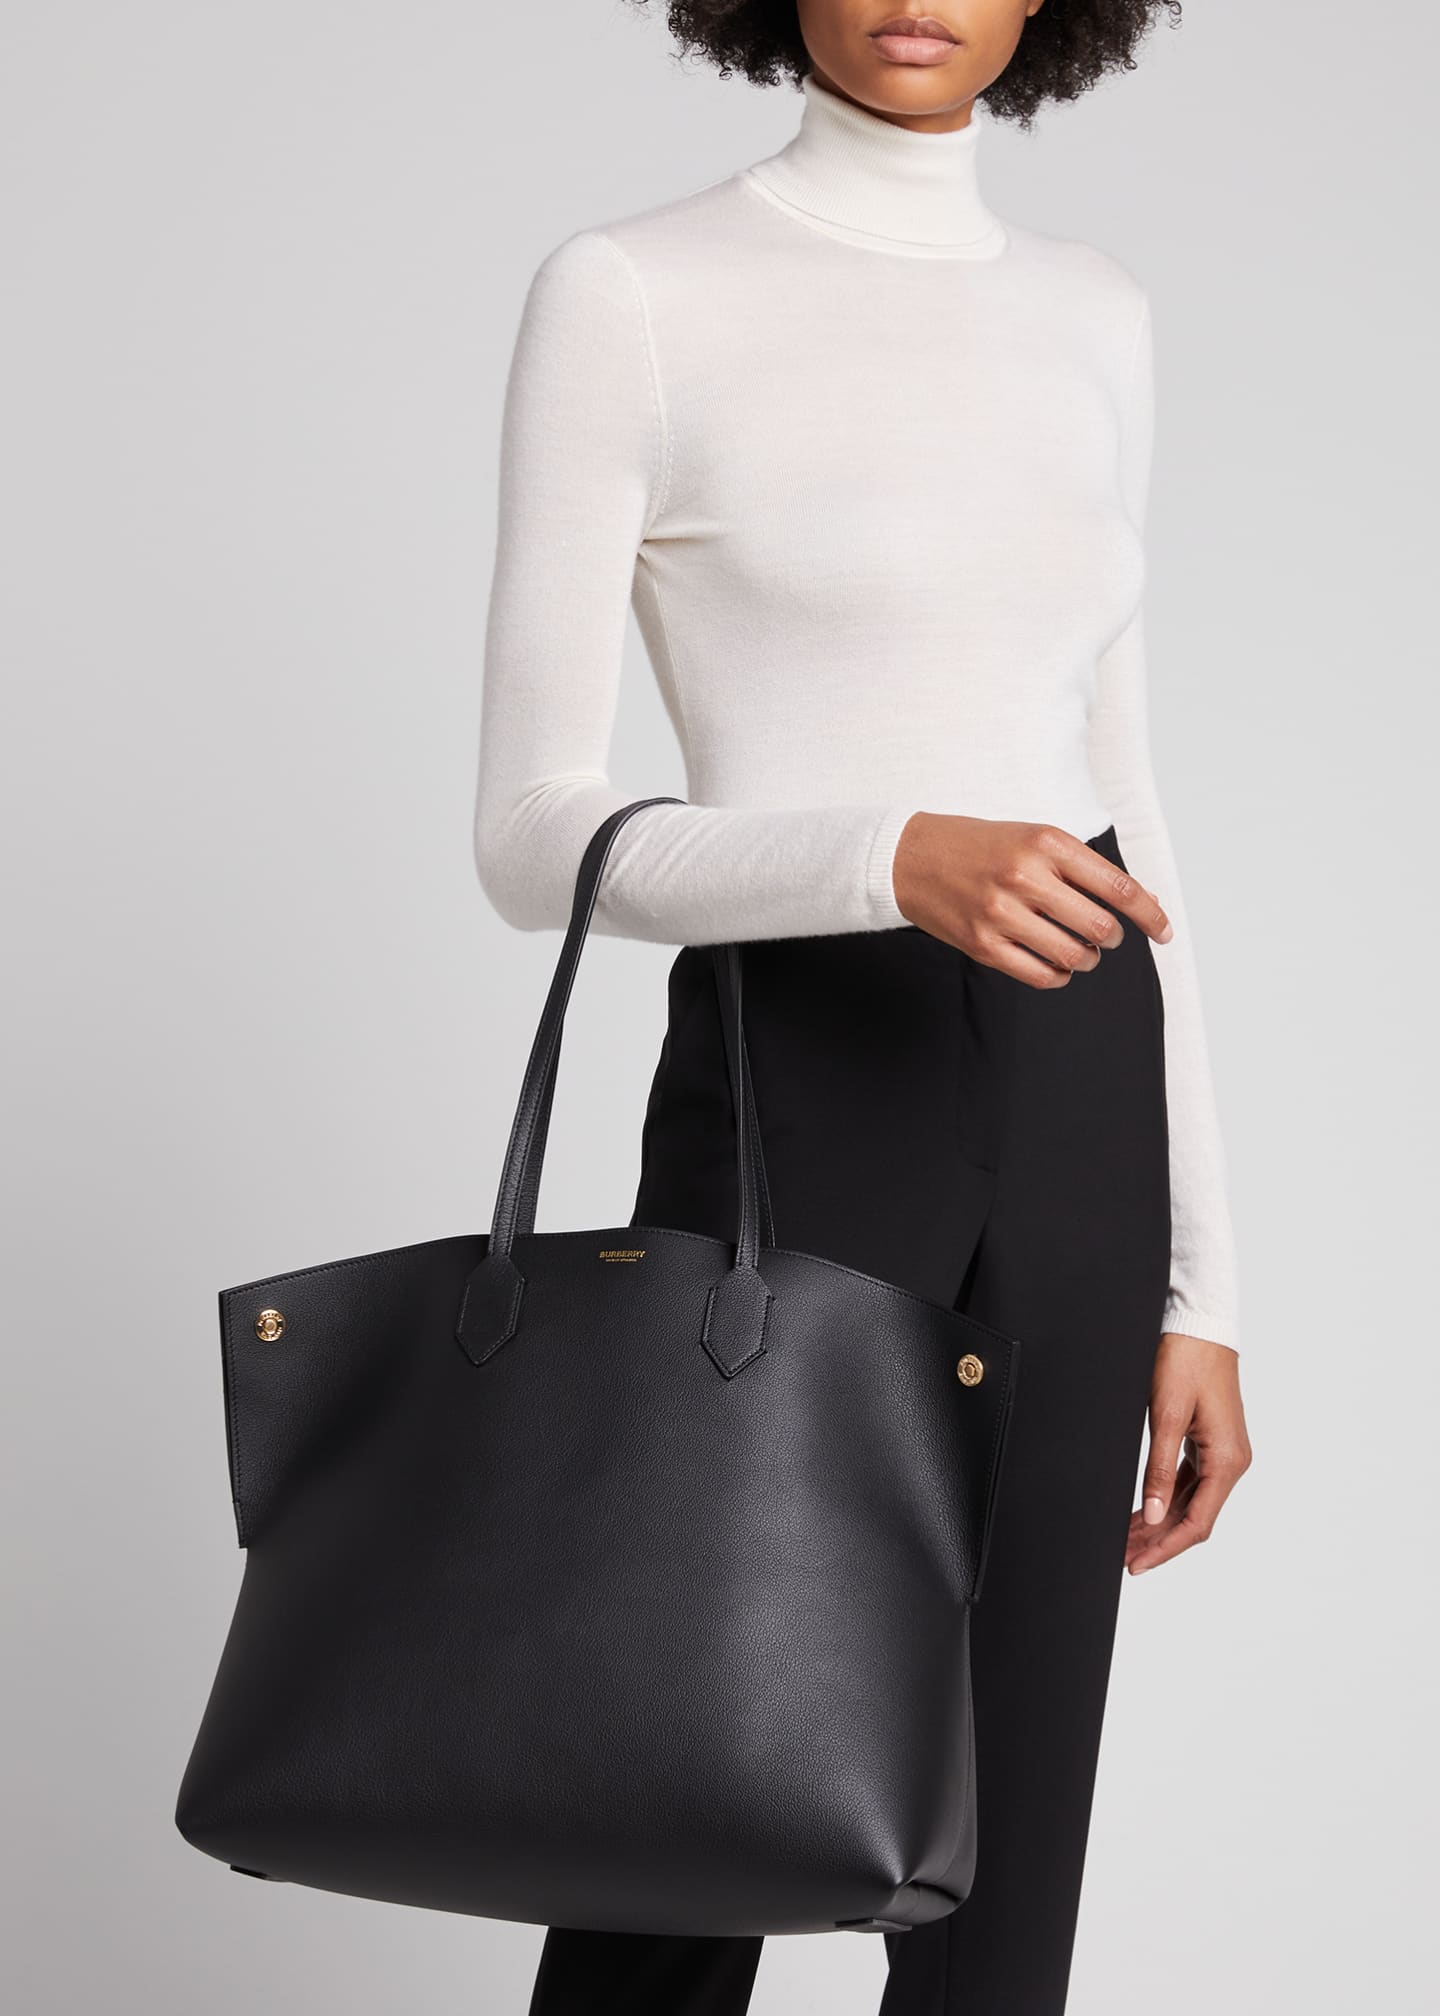 Burberry Society Large Leather Tote Bag | SEMA Data Co-op